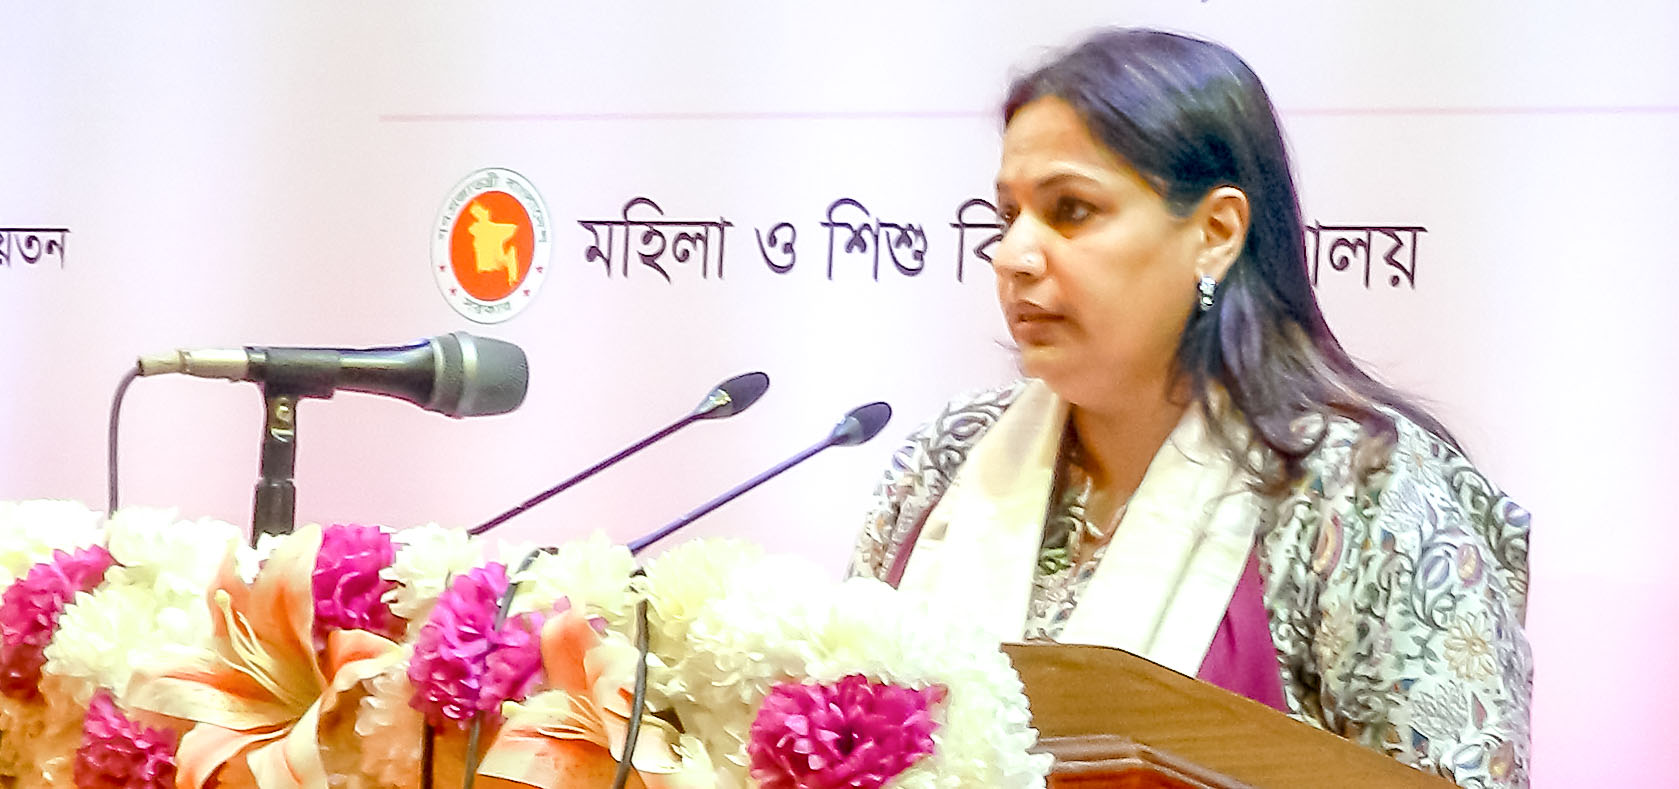 Gitanjali Singh delivering remarks as the Special Guest at the IWD 2022 National event. Photo: UN Women/Shararat Islam